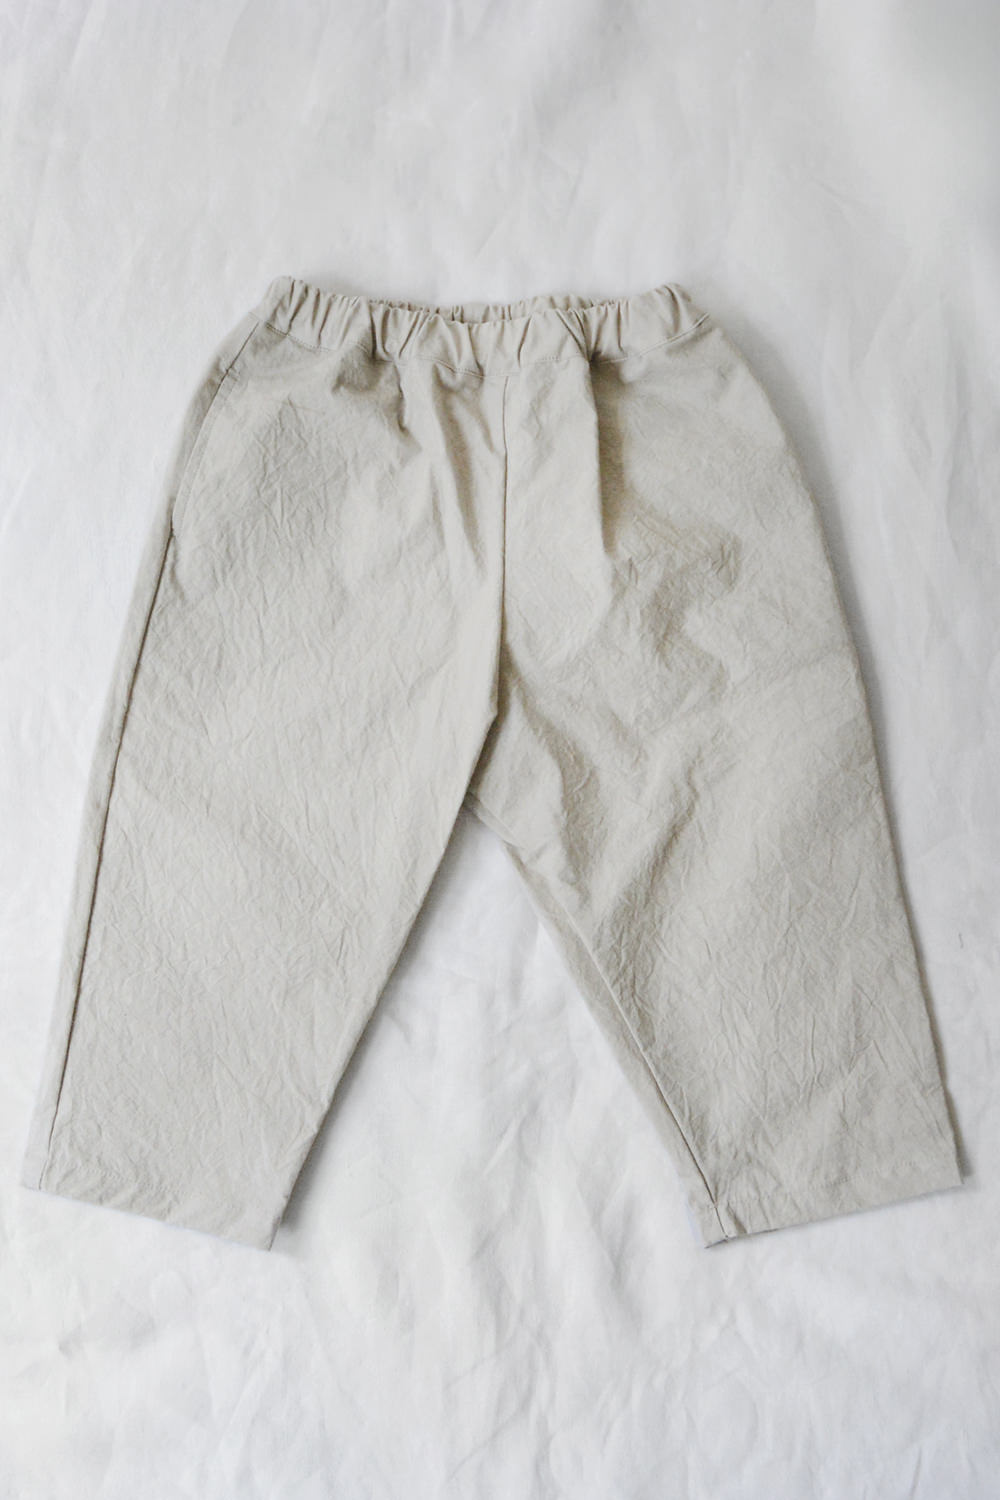 MAKIE Cotton Pants in Sand Top Picture.